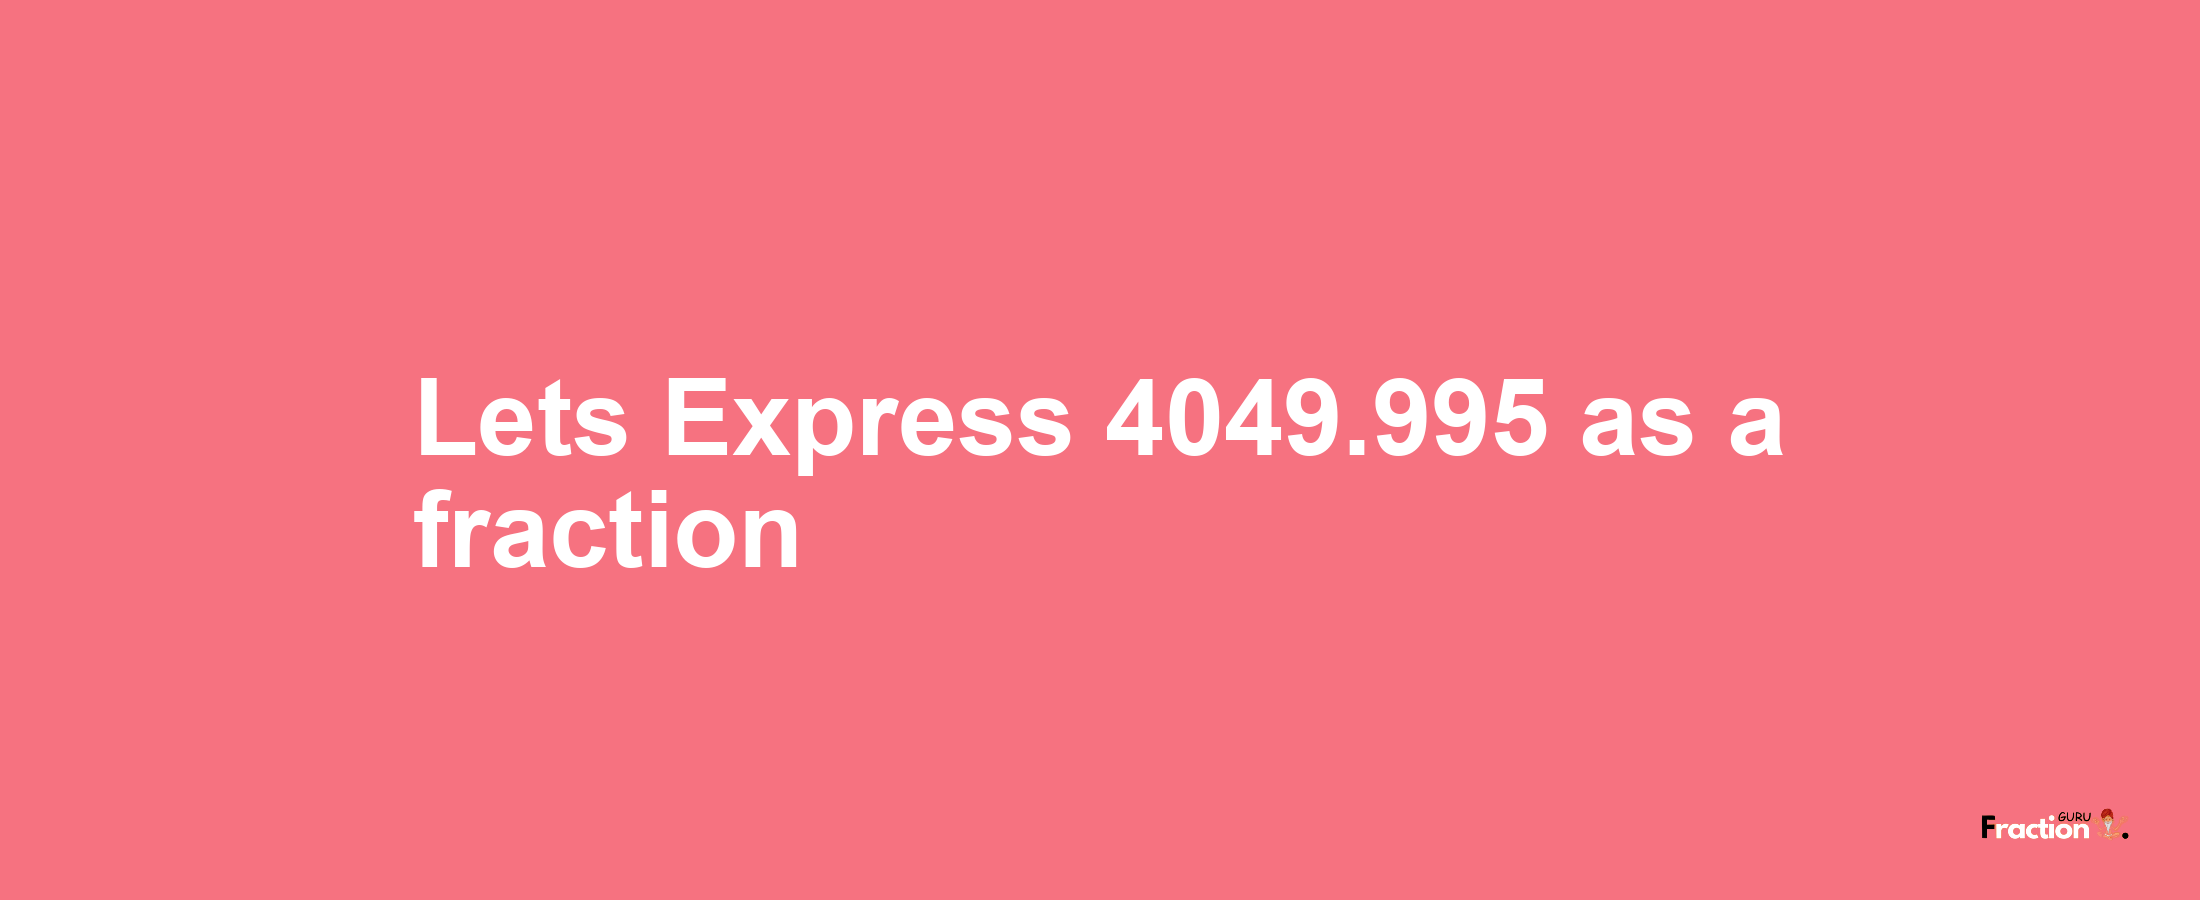 Lets Express 4049.995 as afraction